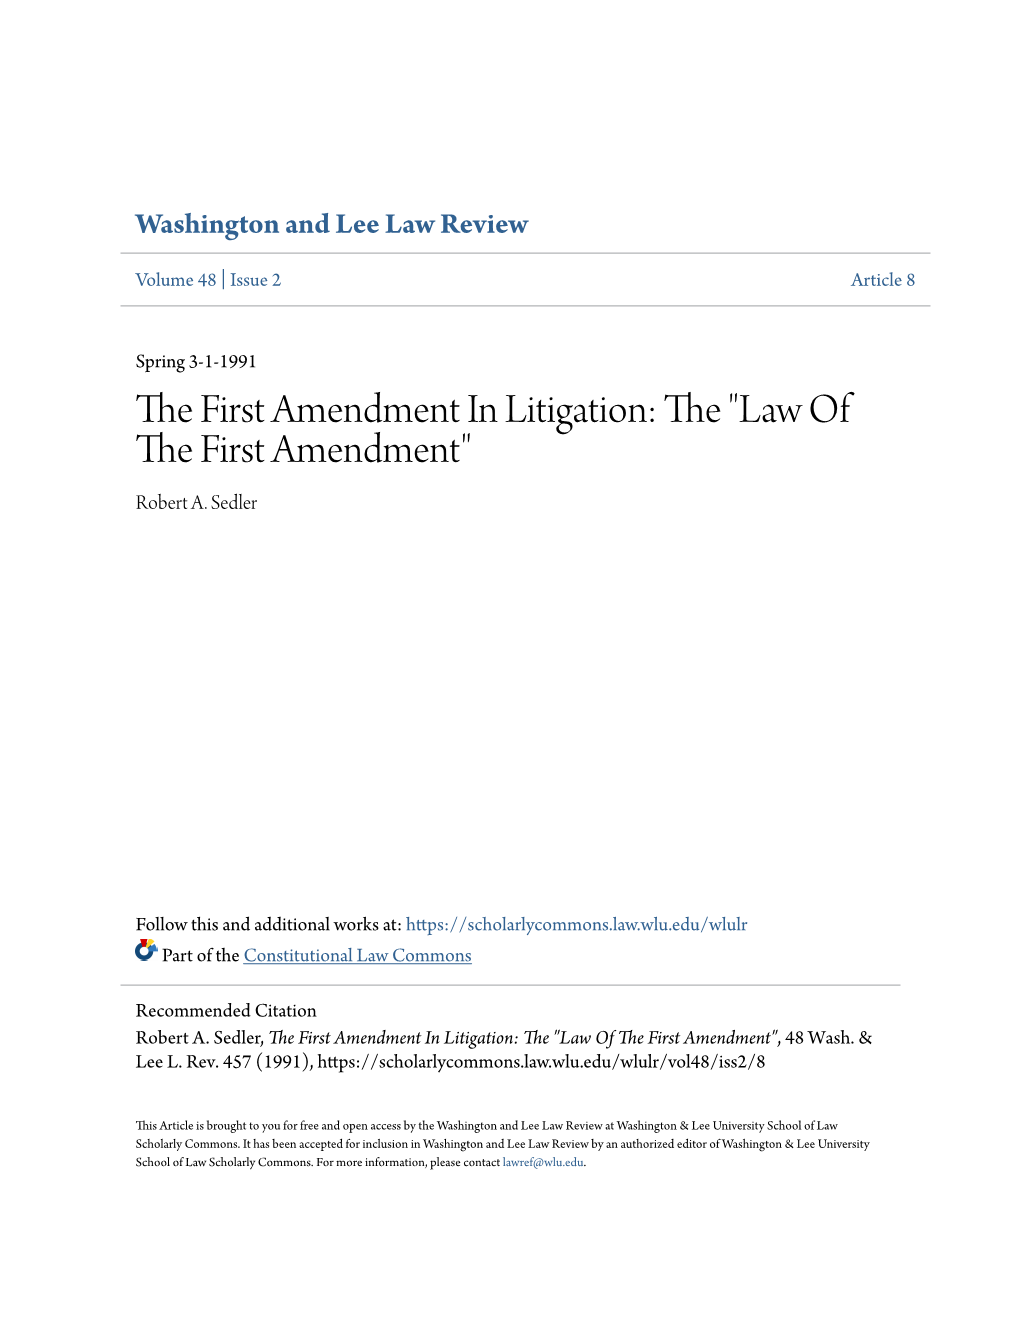 The First Amendment in Litigation: the "Law of the First Amendment", 48 Wash